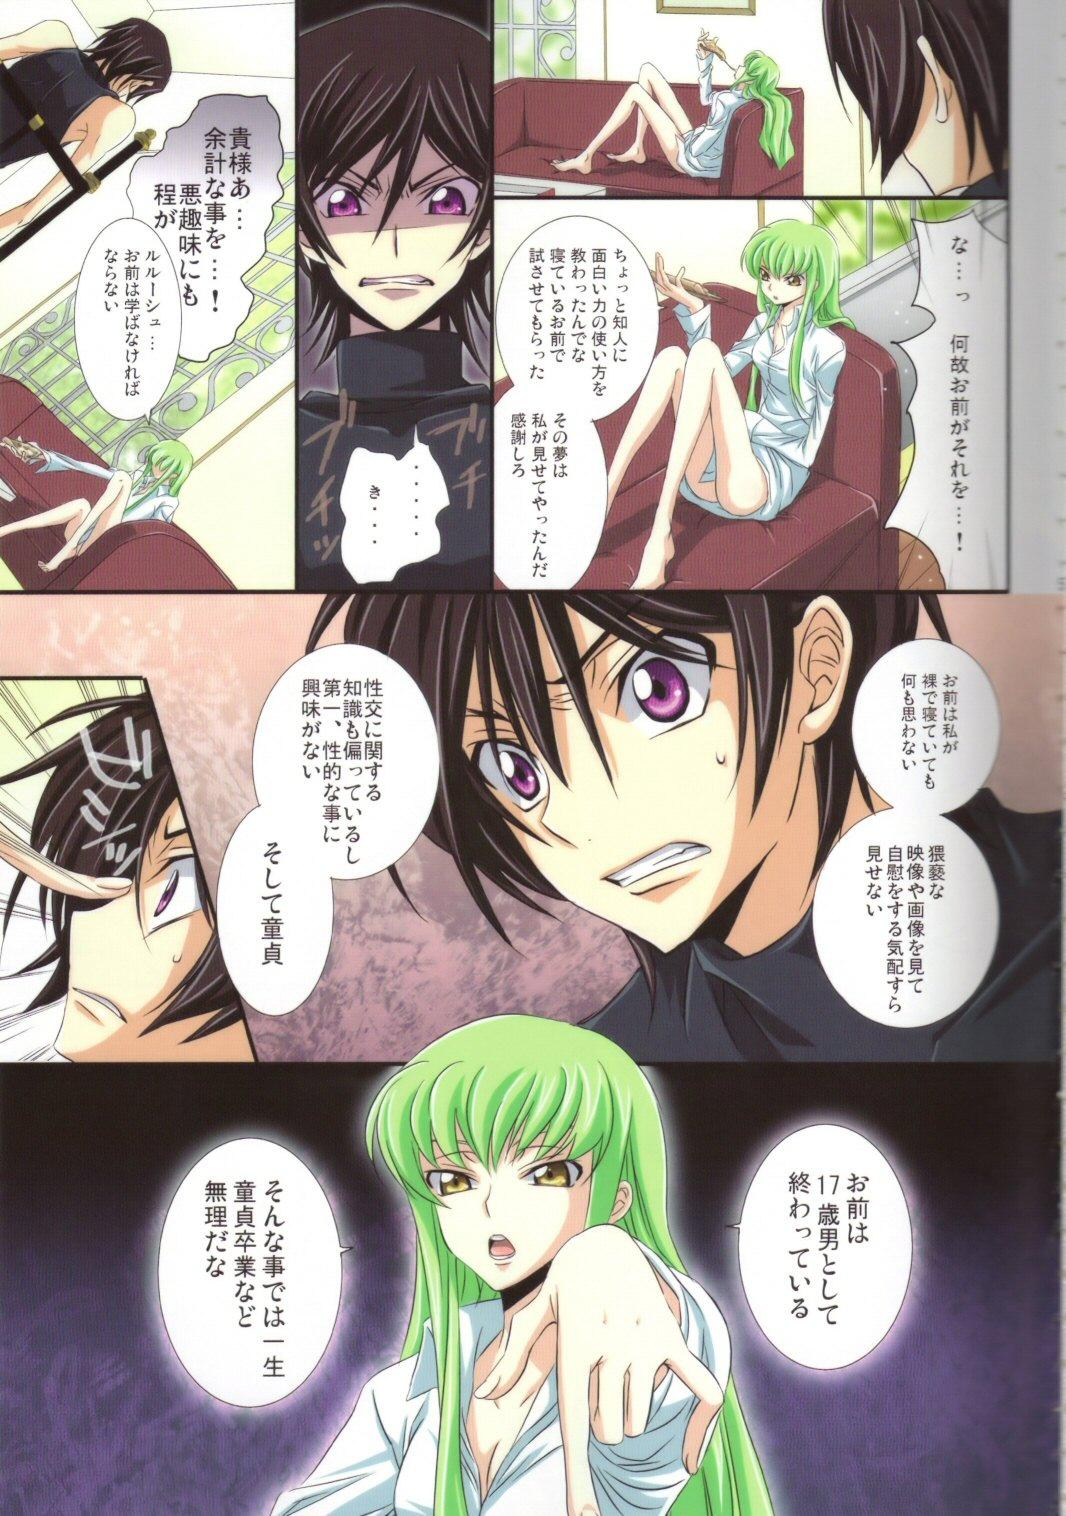 Perfect Tits on・non・om - Code geass Punjabi - Page 4